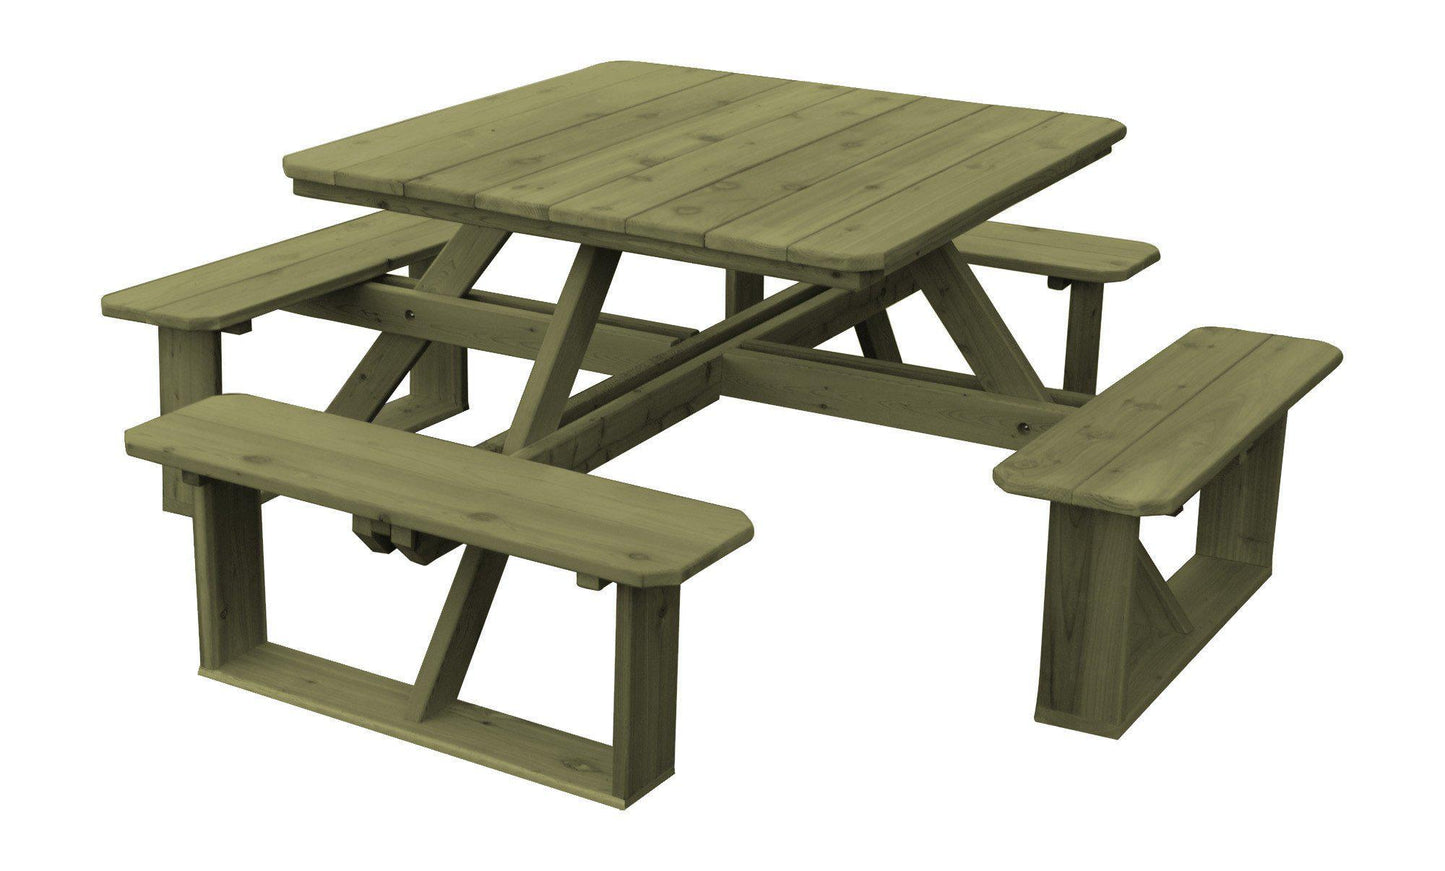 A&L FURNITURE CO. Western Red Cedar 44"  Square Walk-In Table- Specify for FREE 2" Umbrella Hole - LEAD TIME TO SHIP 2 WEEKS